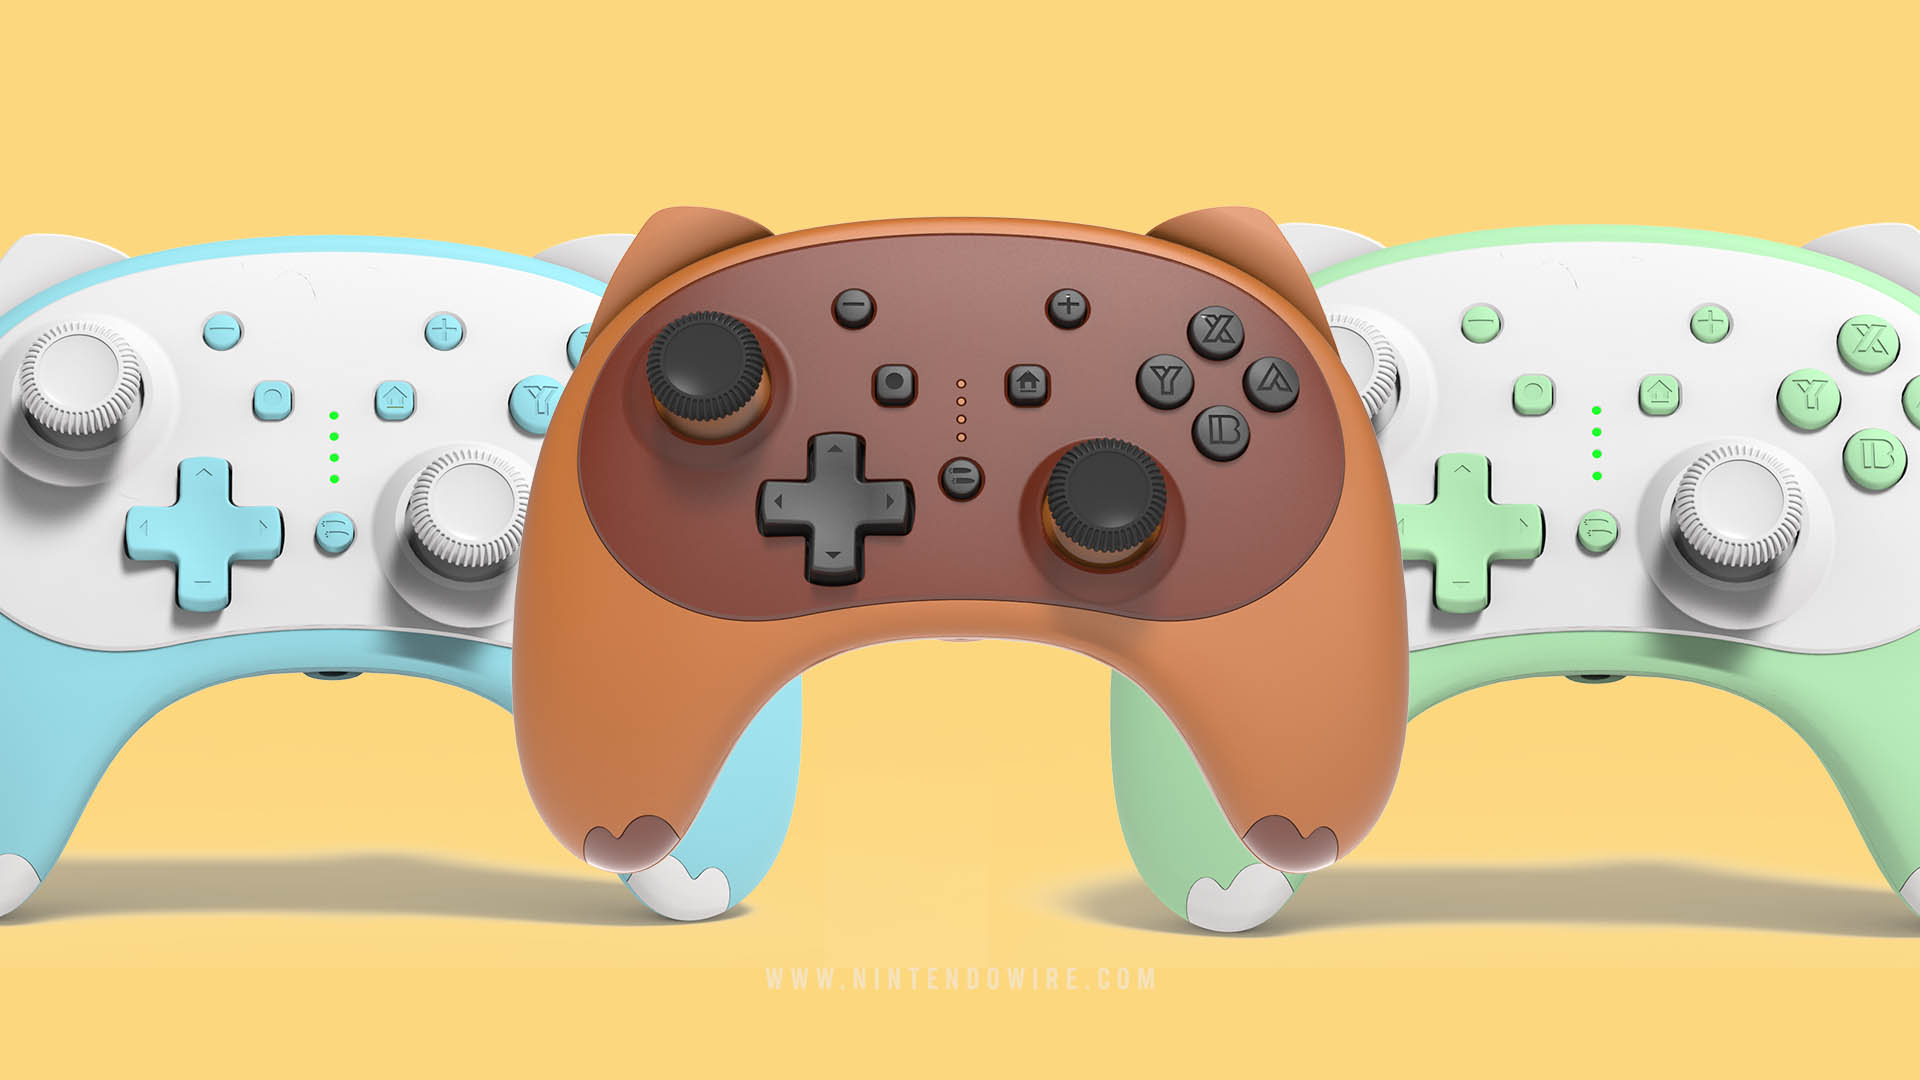 animal crossing wireless switch controller